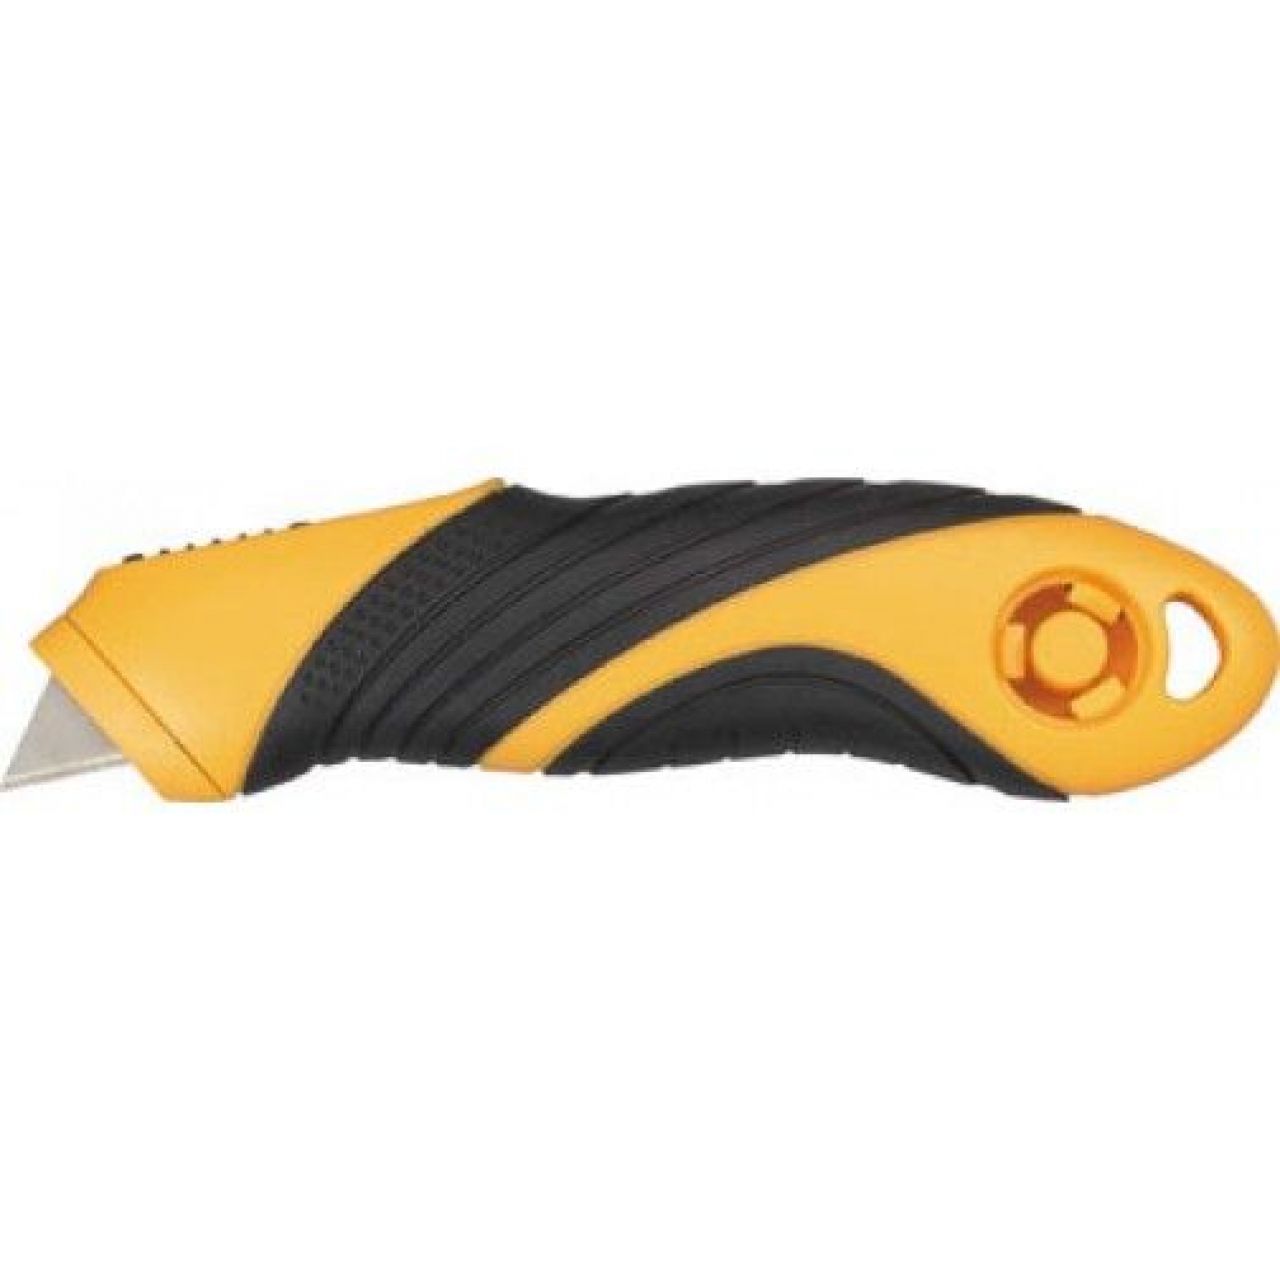 Cutter safety master profesional (amarillo) 0.6x18.7 mm